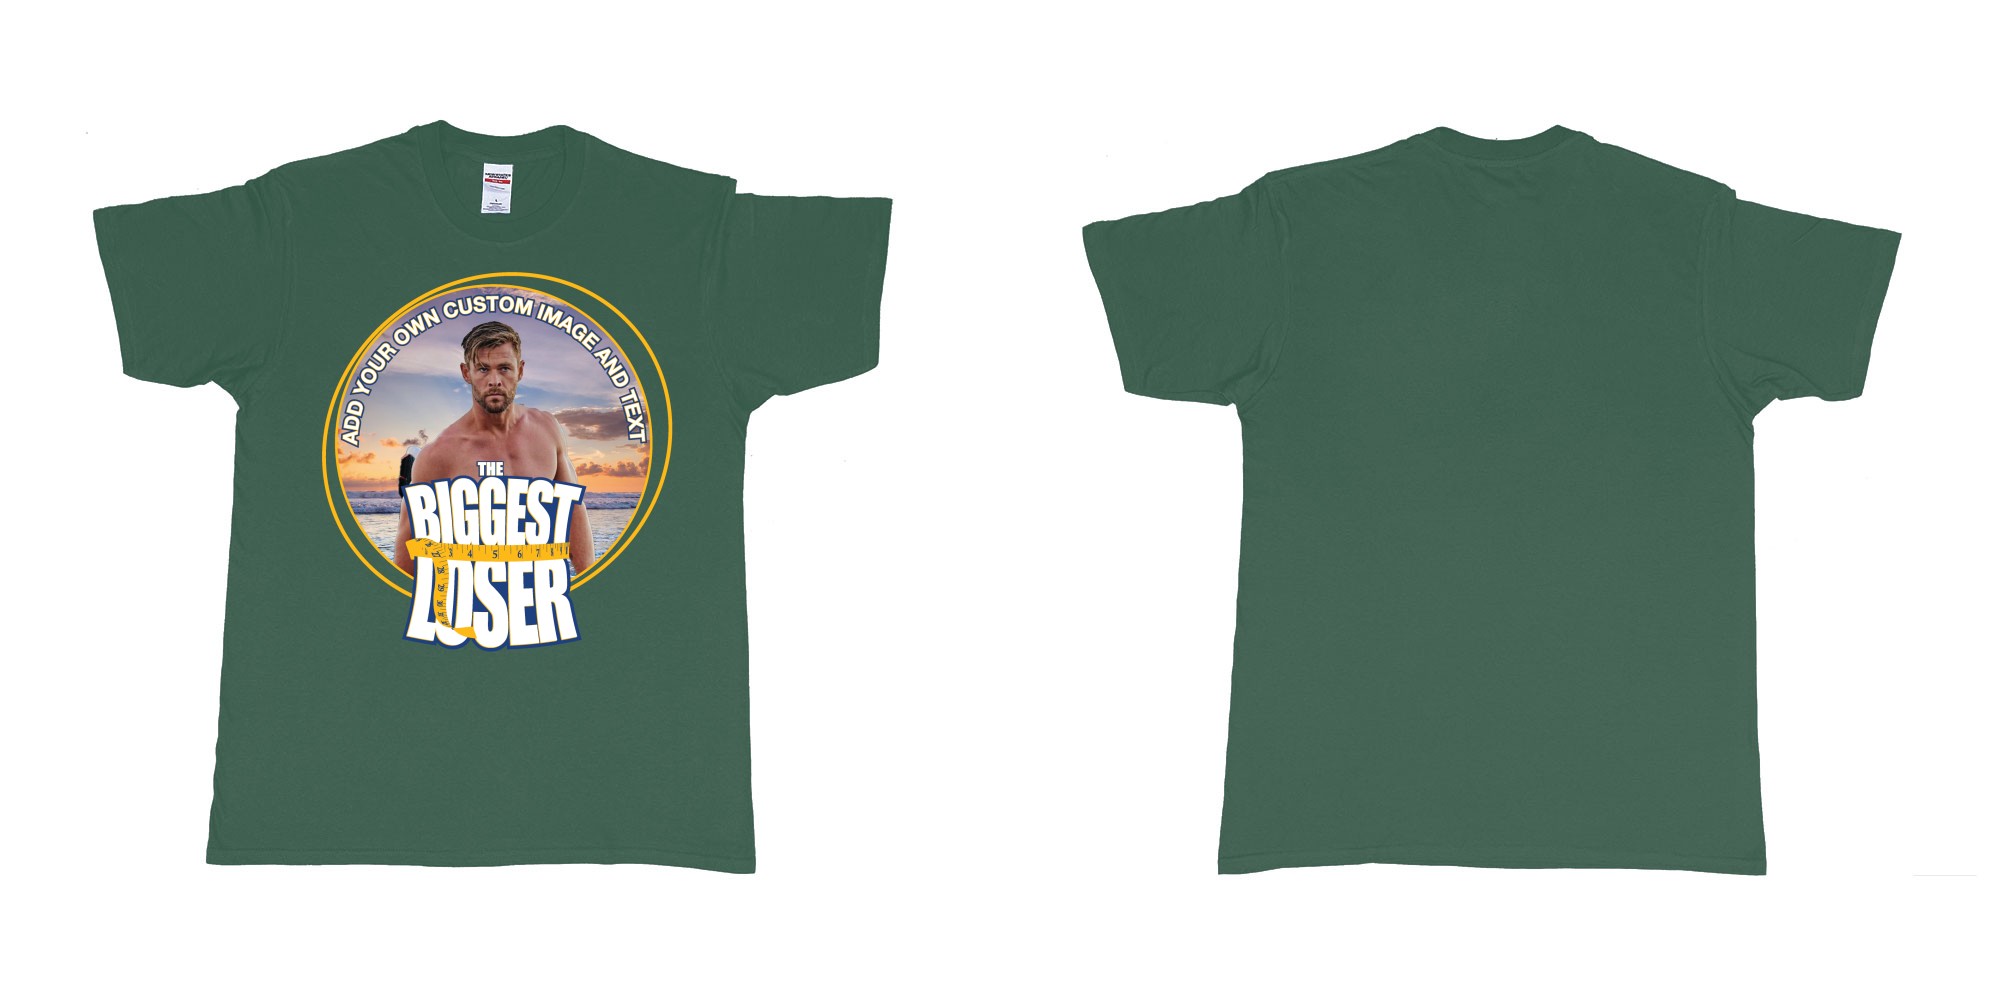 Custom tshirt design the biggest loser logo custom image funny tshirt design in fabric color forest-green choice your own text made in Bali by The Pirate Way